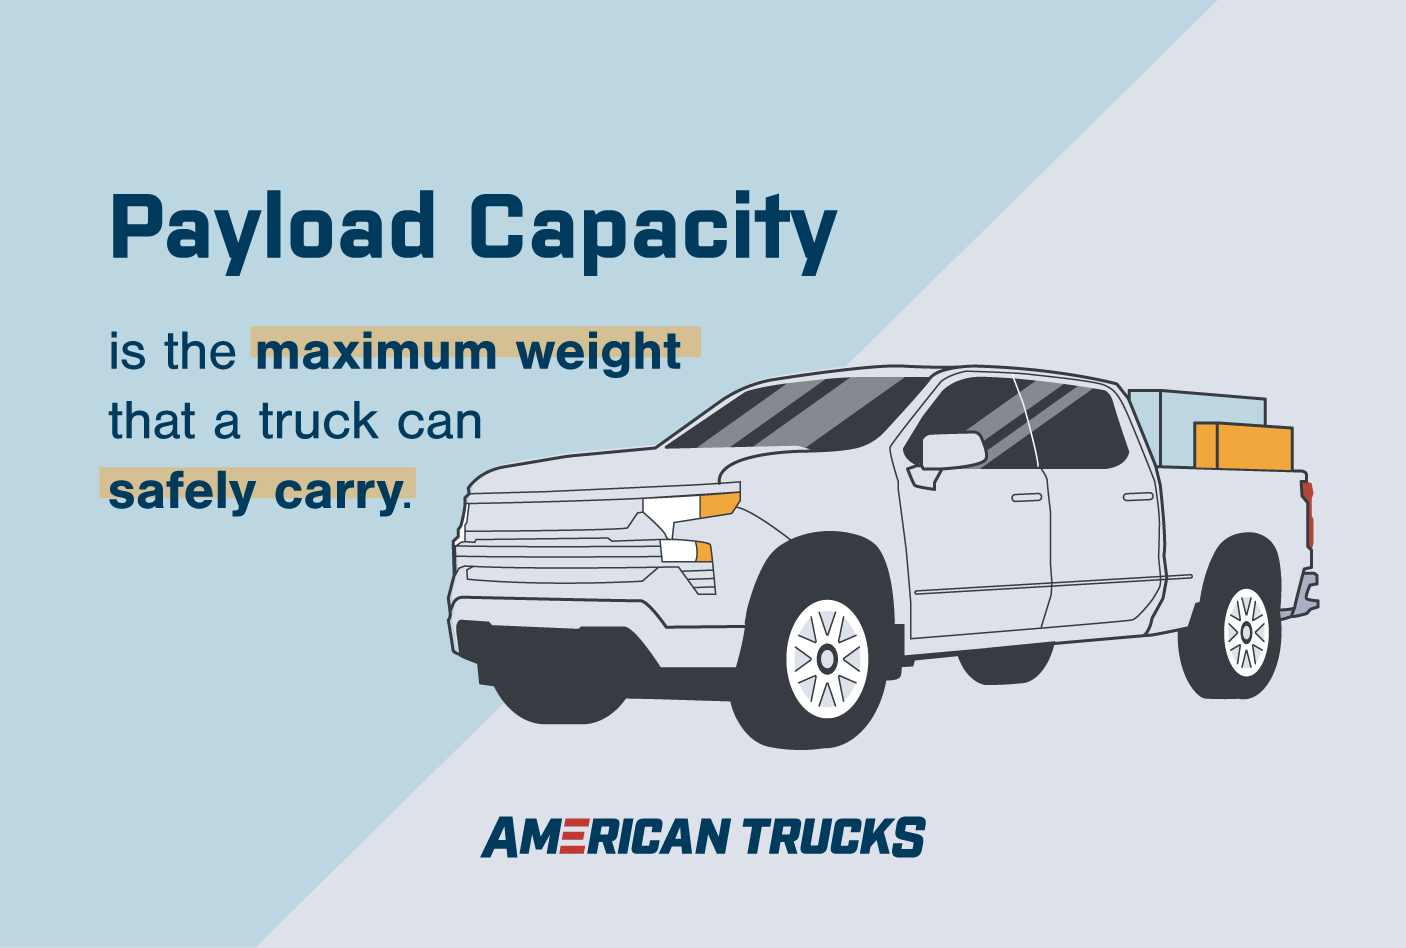 Illustration of a pick up truck carrying cargo in the truck bed. Payload capacity is the maximum weight a truck can safely carry. 